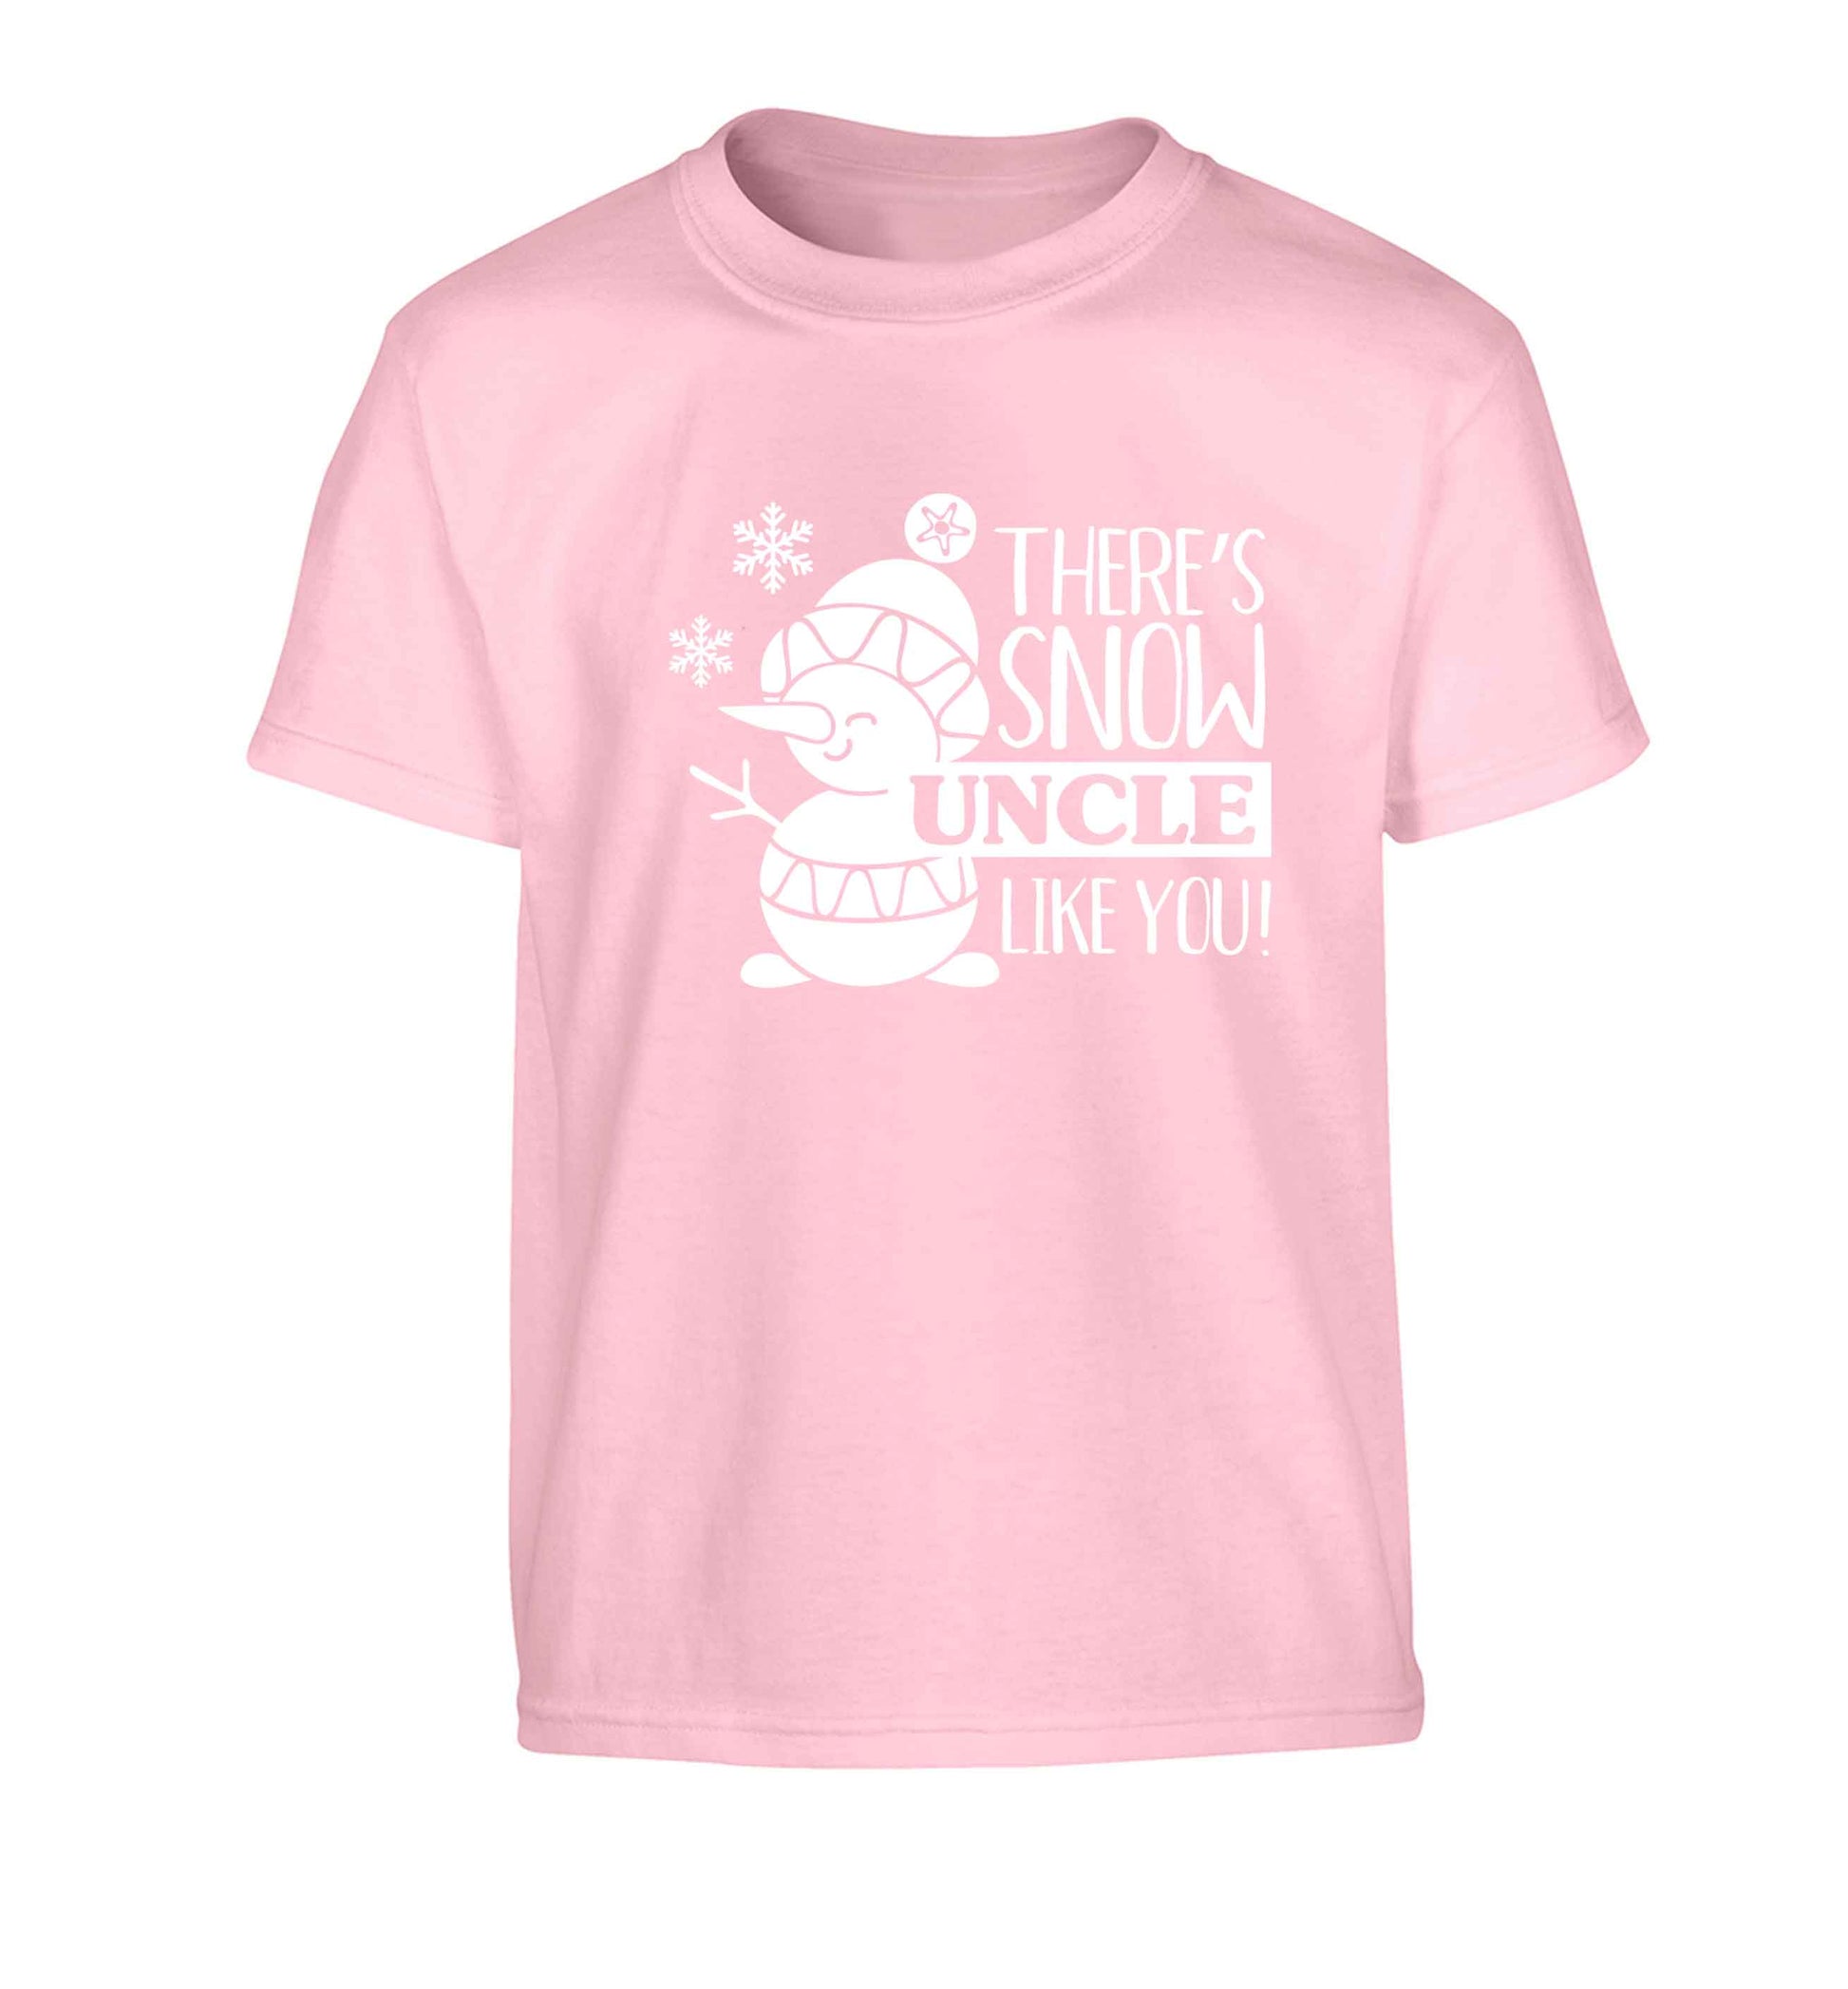 There's snow uncle like you Children's light pink Tshirt 12-13 Years